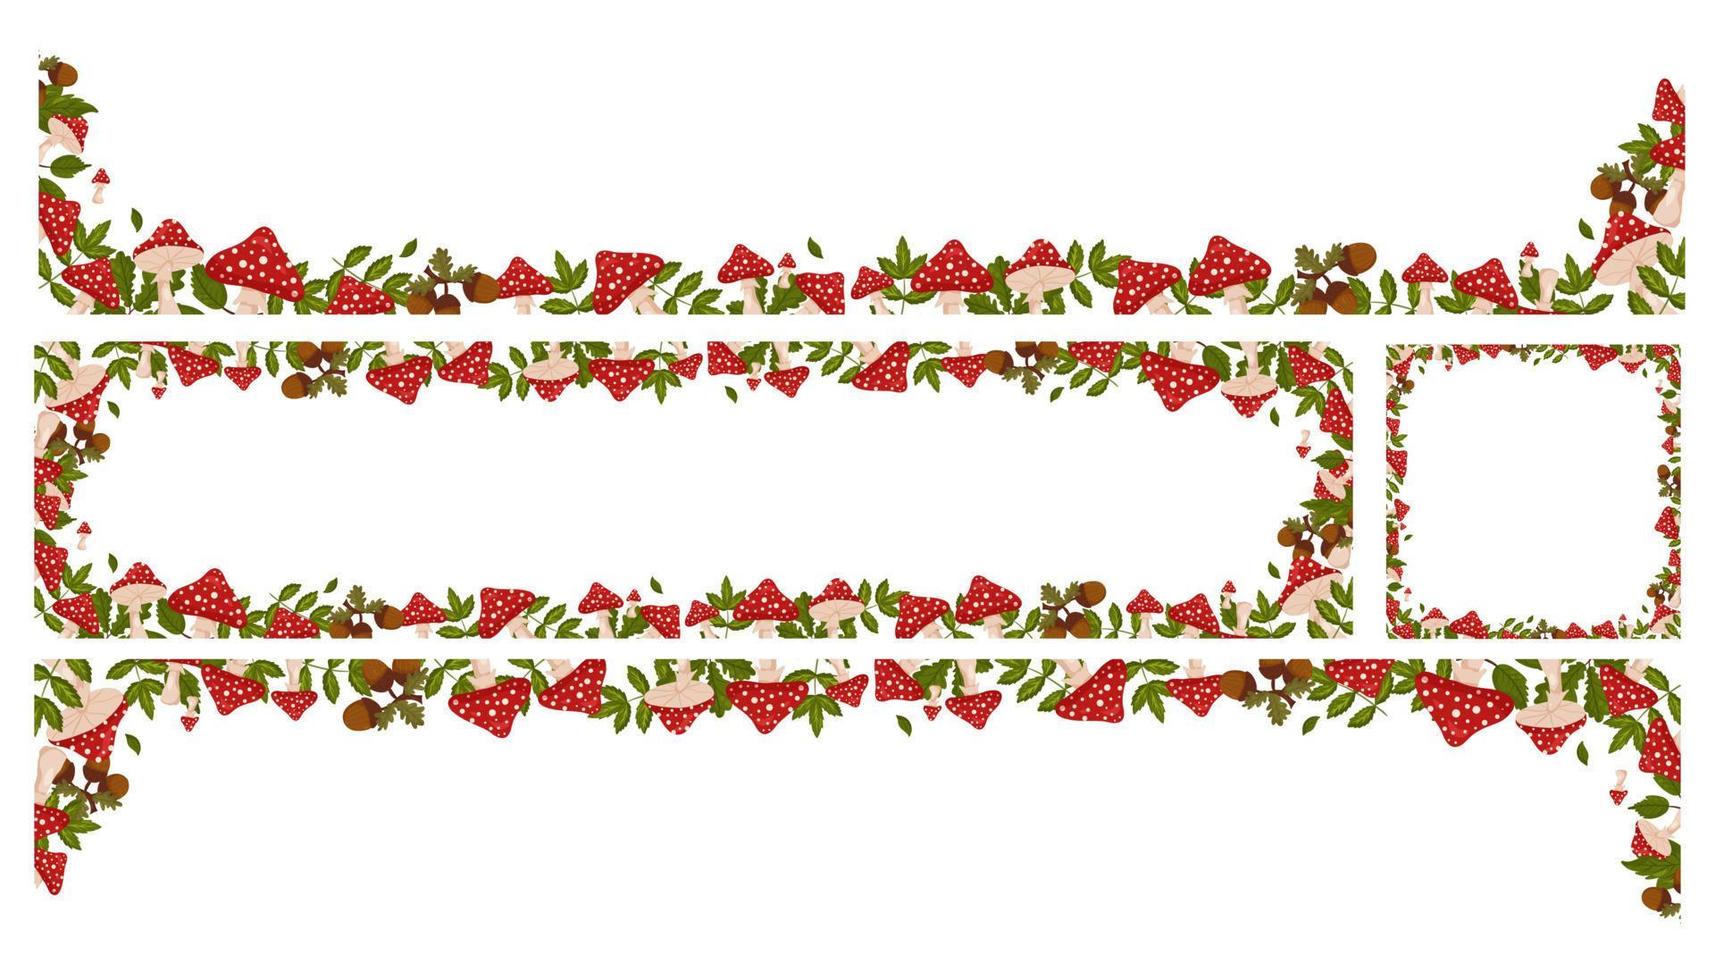 Spring horizontal frames with mushrooms, fly agarics, acorns and leaves. Autumn vector banners